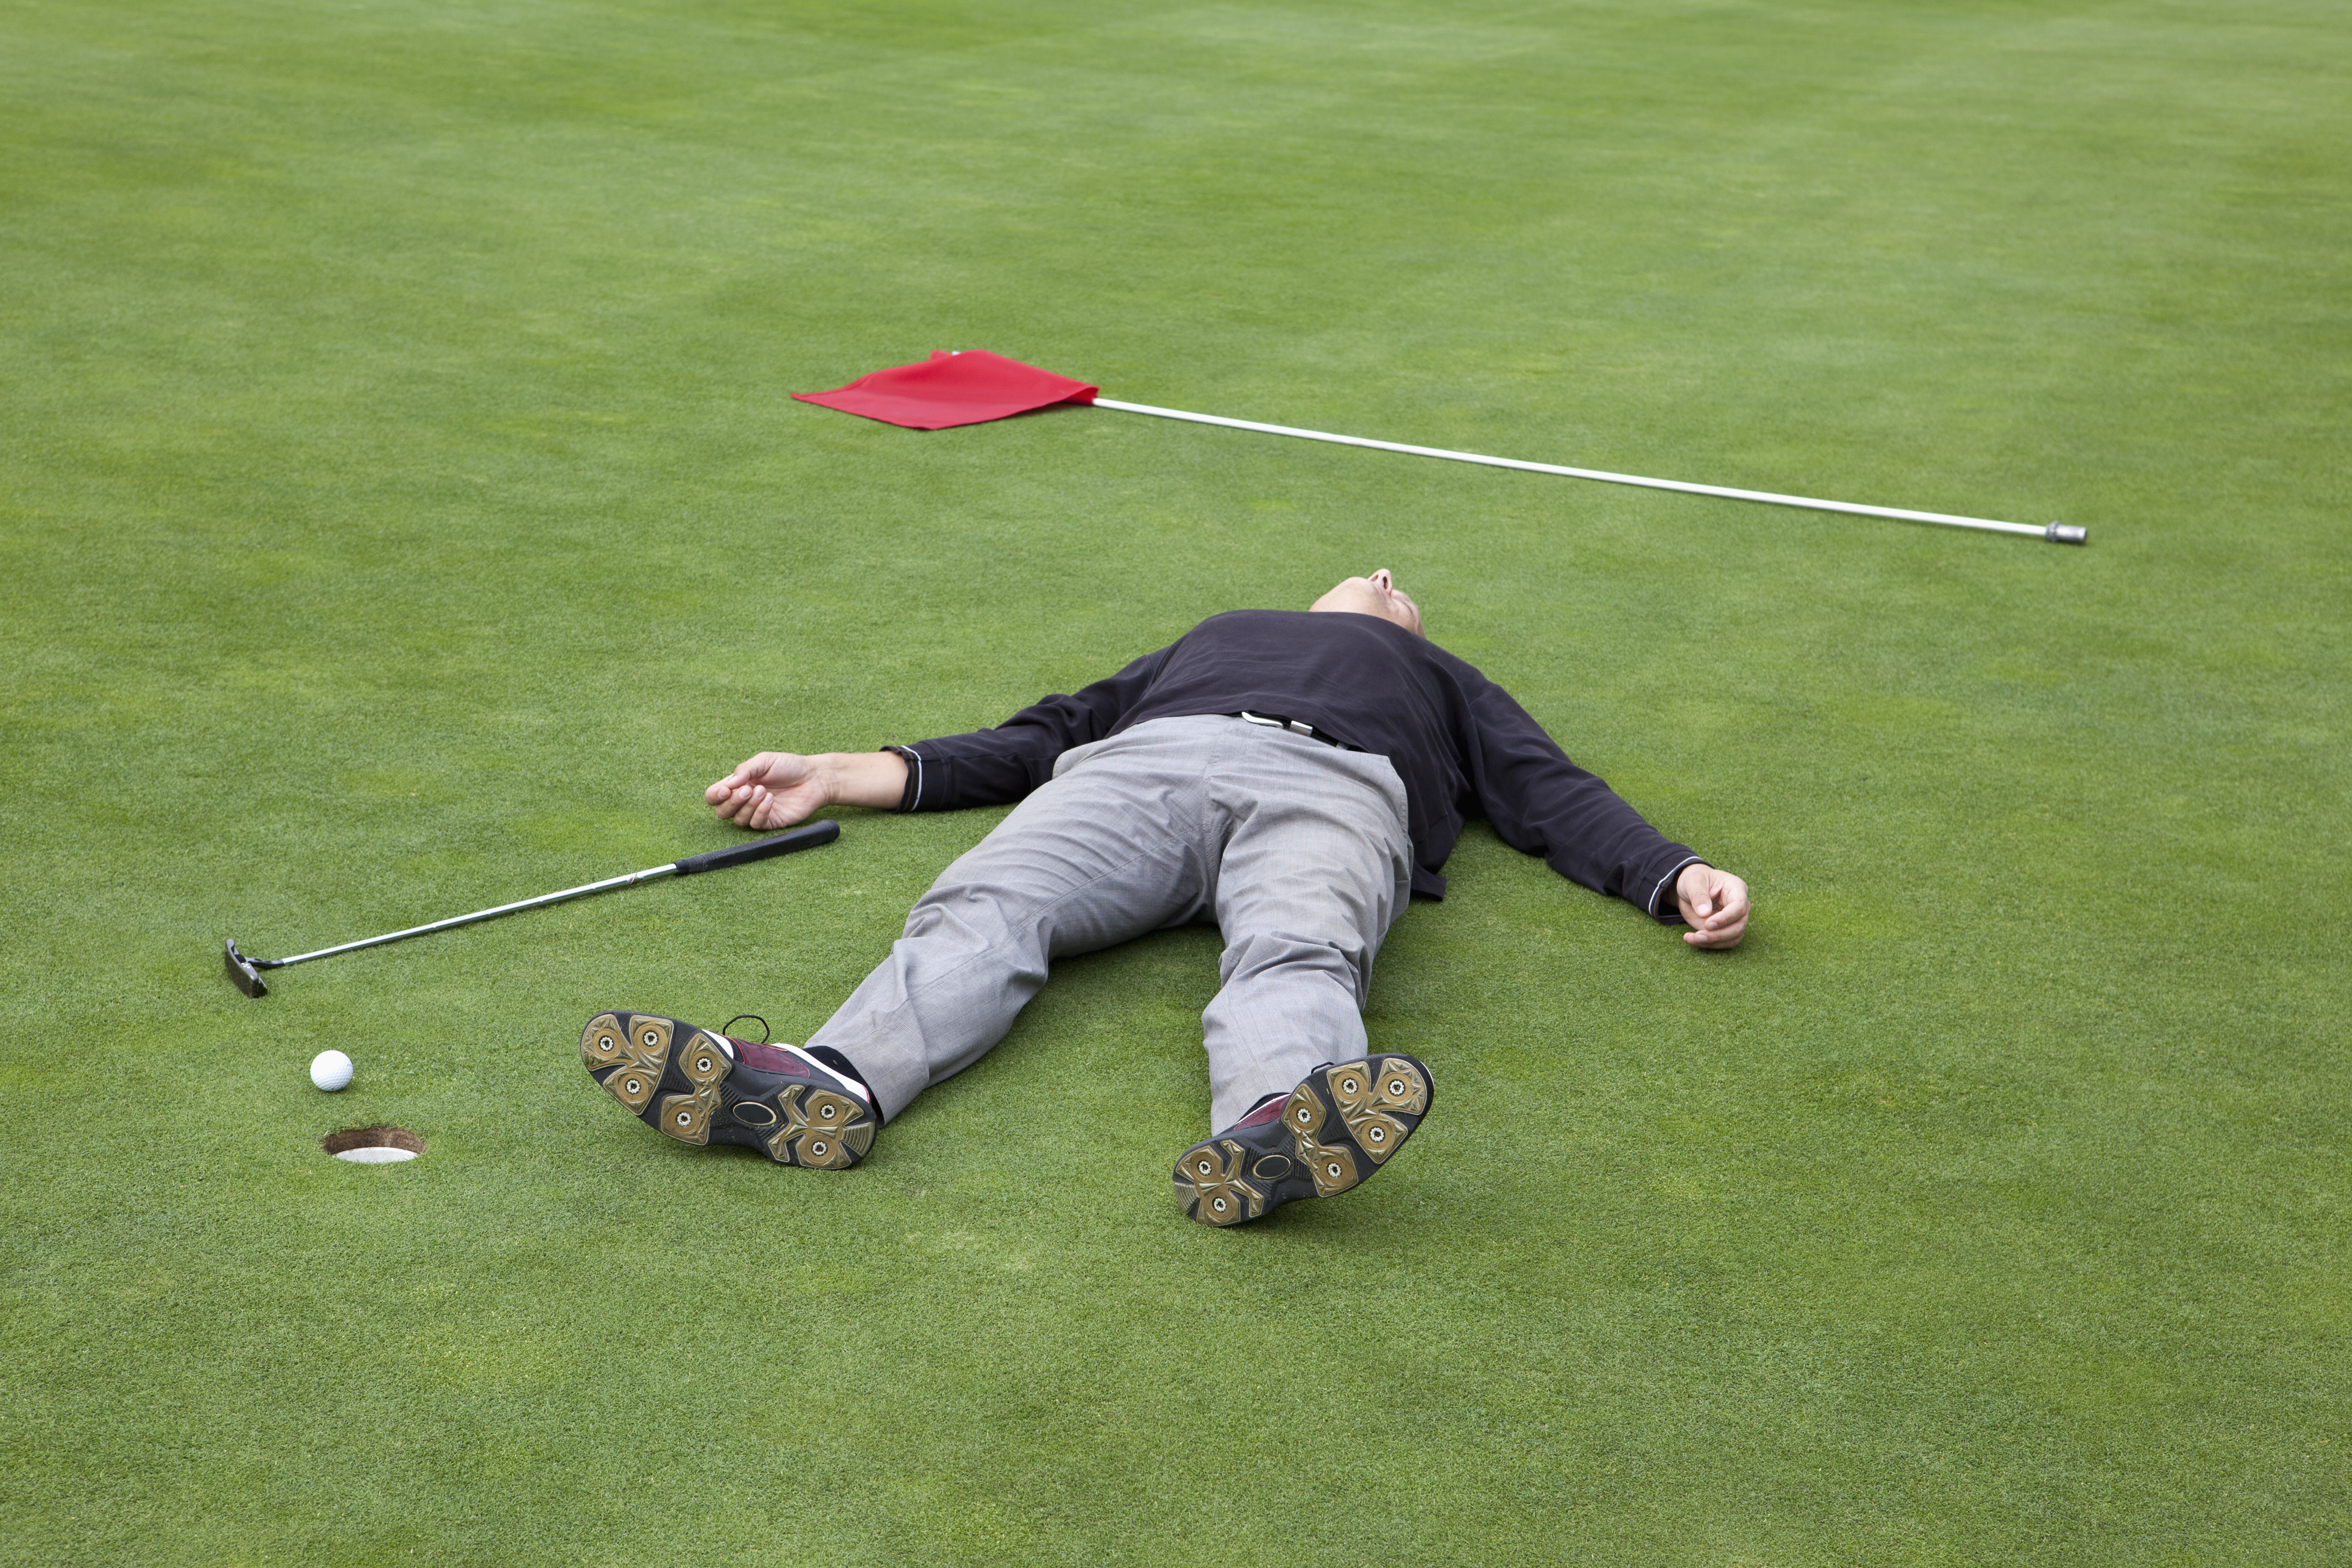 The 9 worst ways to make bogey, ranked from mildly frustrating to rage-inducing | Golf News and Tour Information | Digest